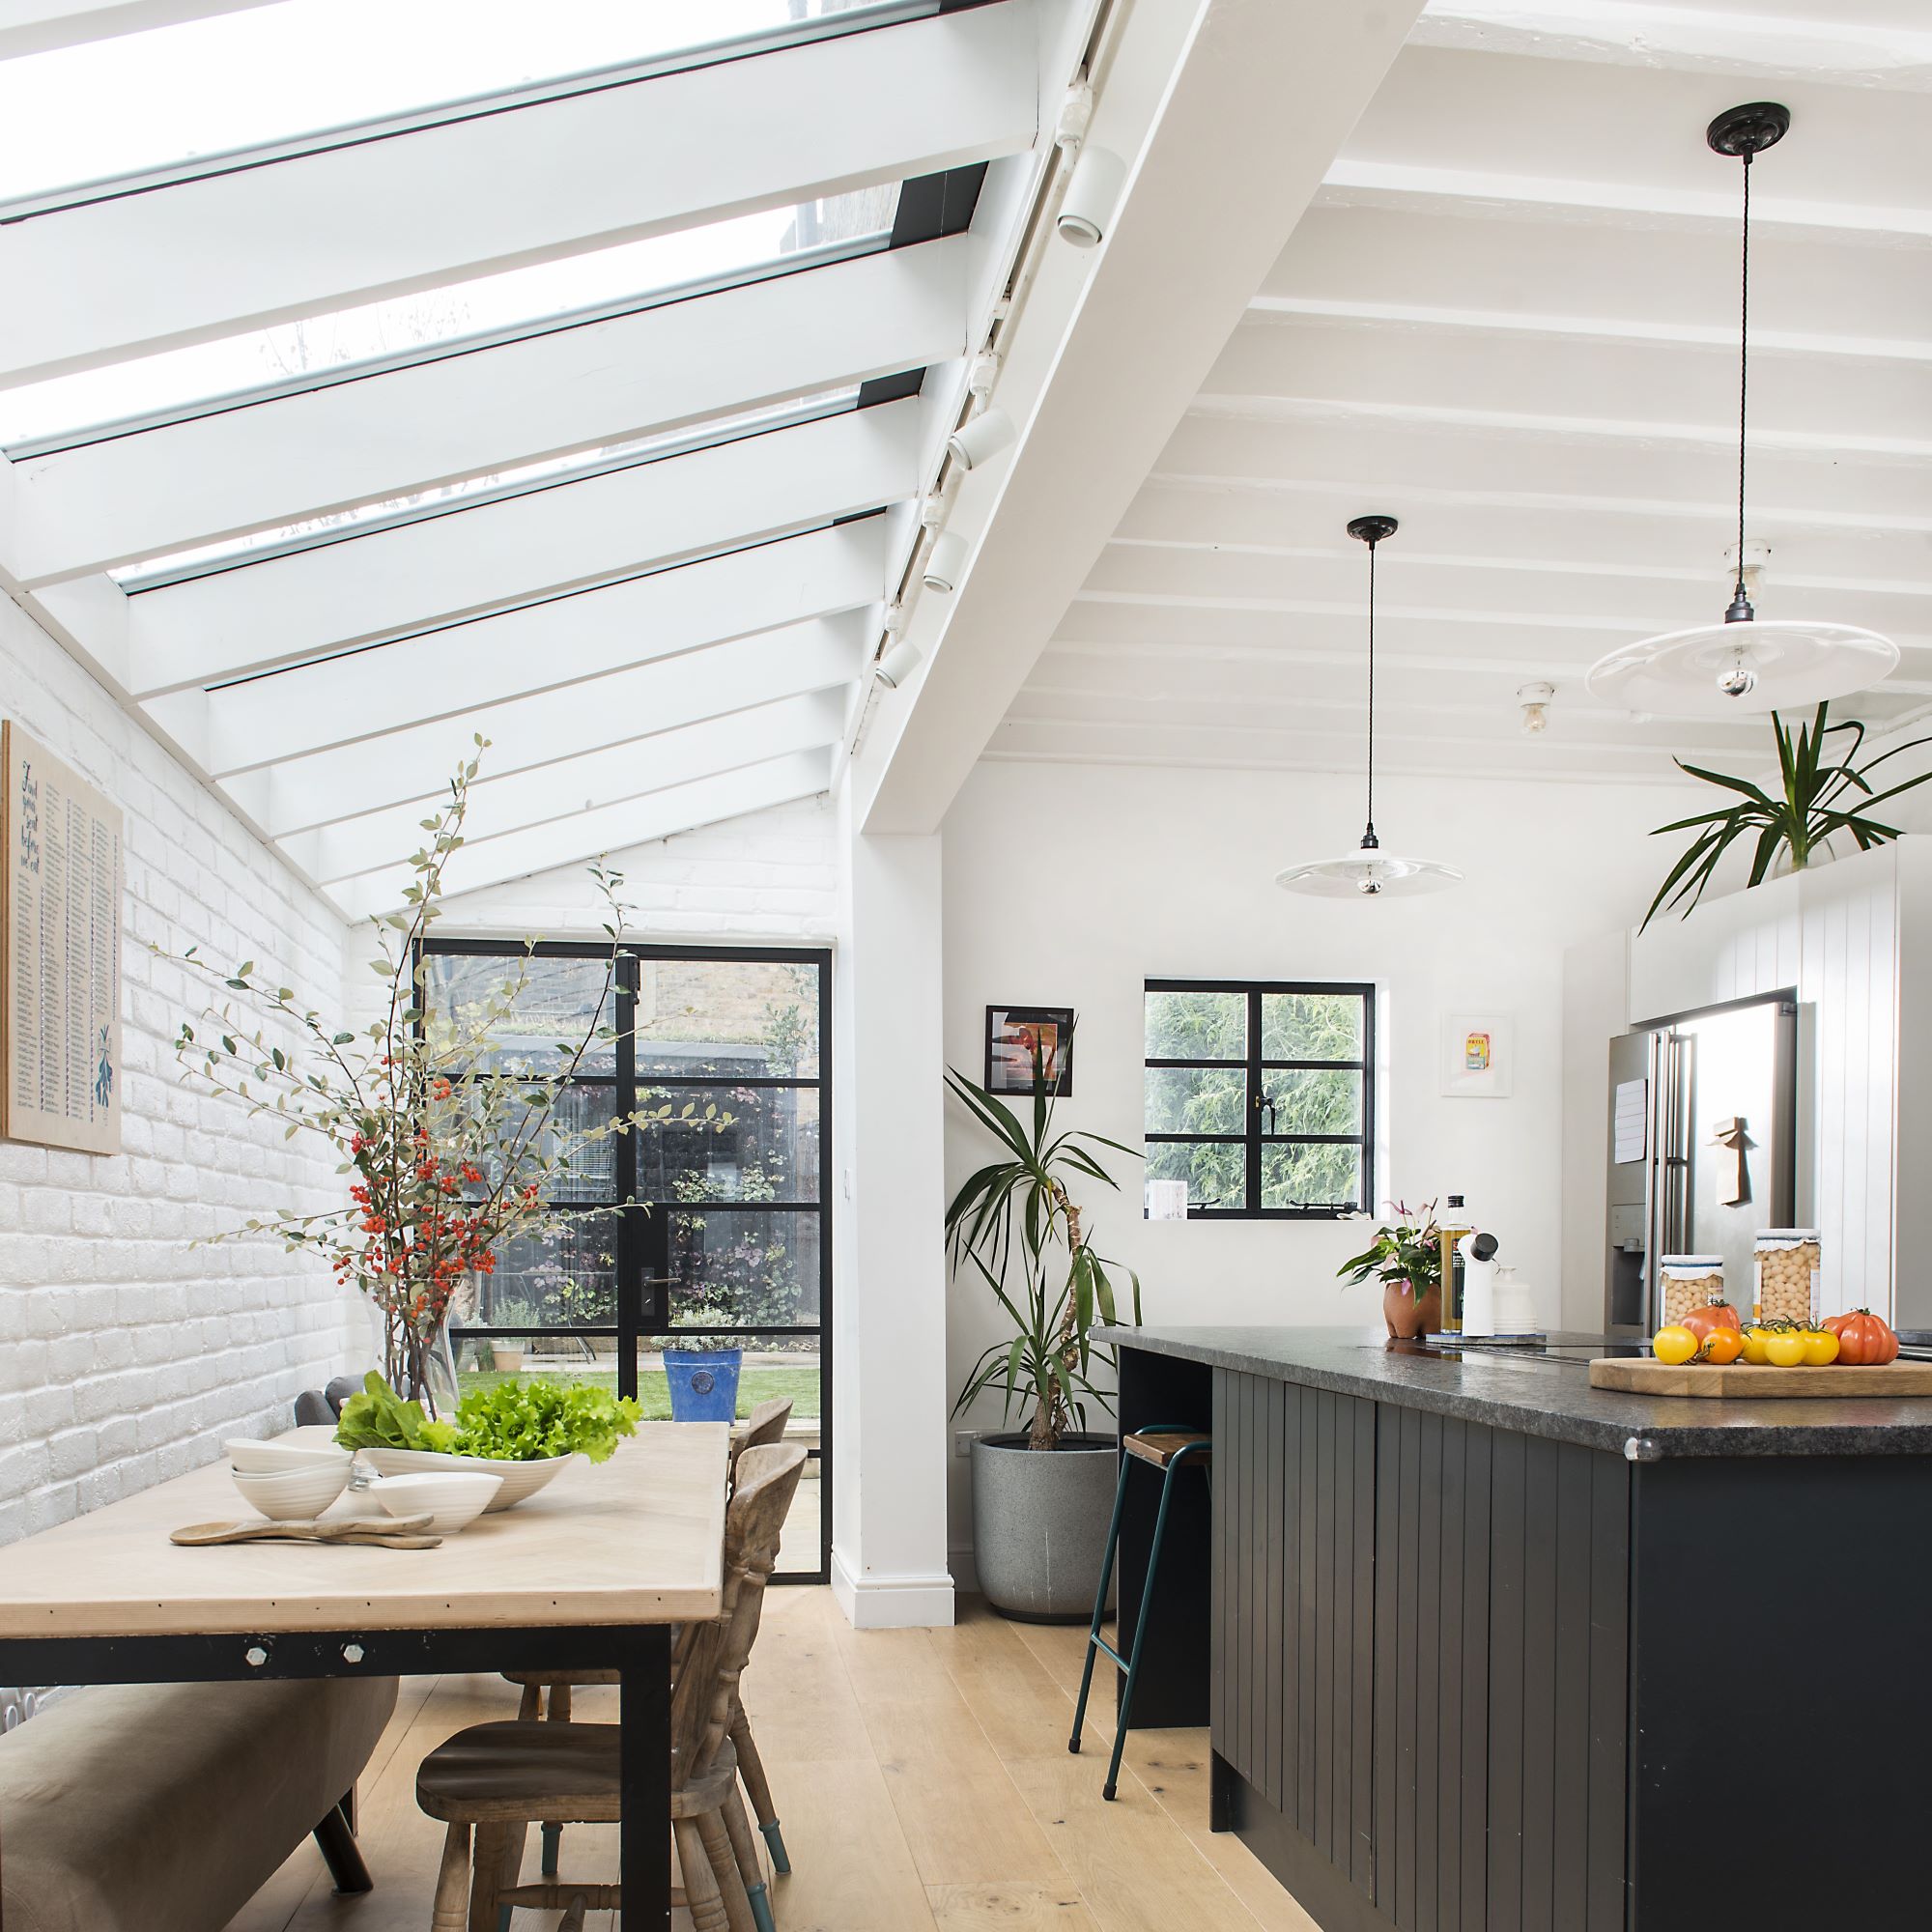 Large kitchen and dining area with half skylight roof